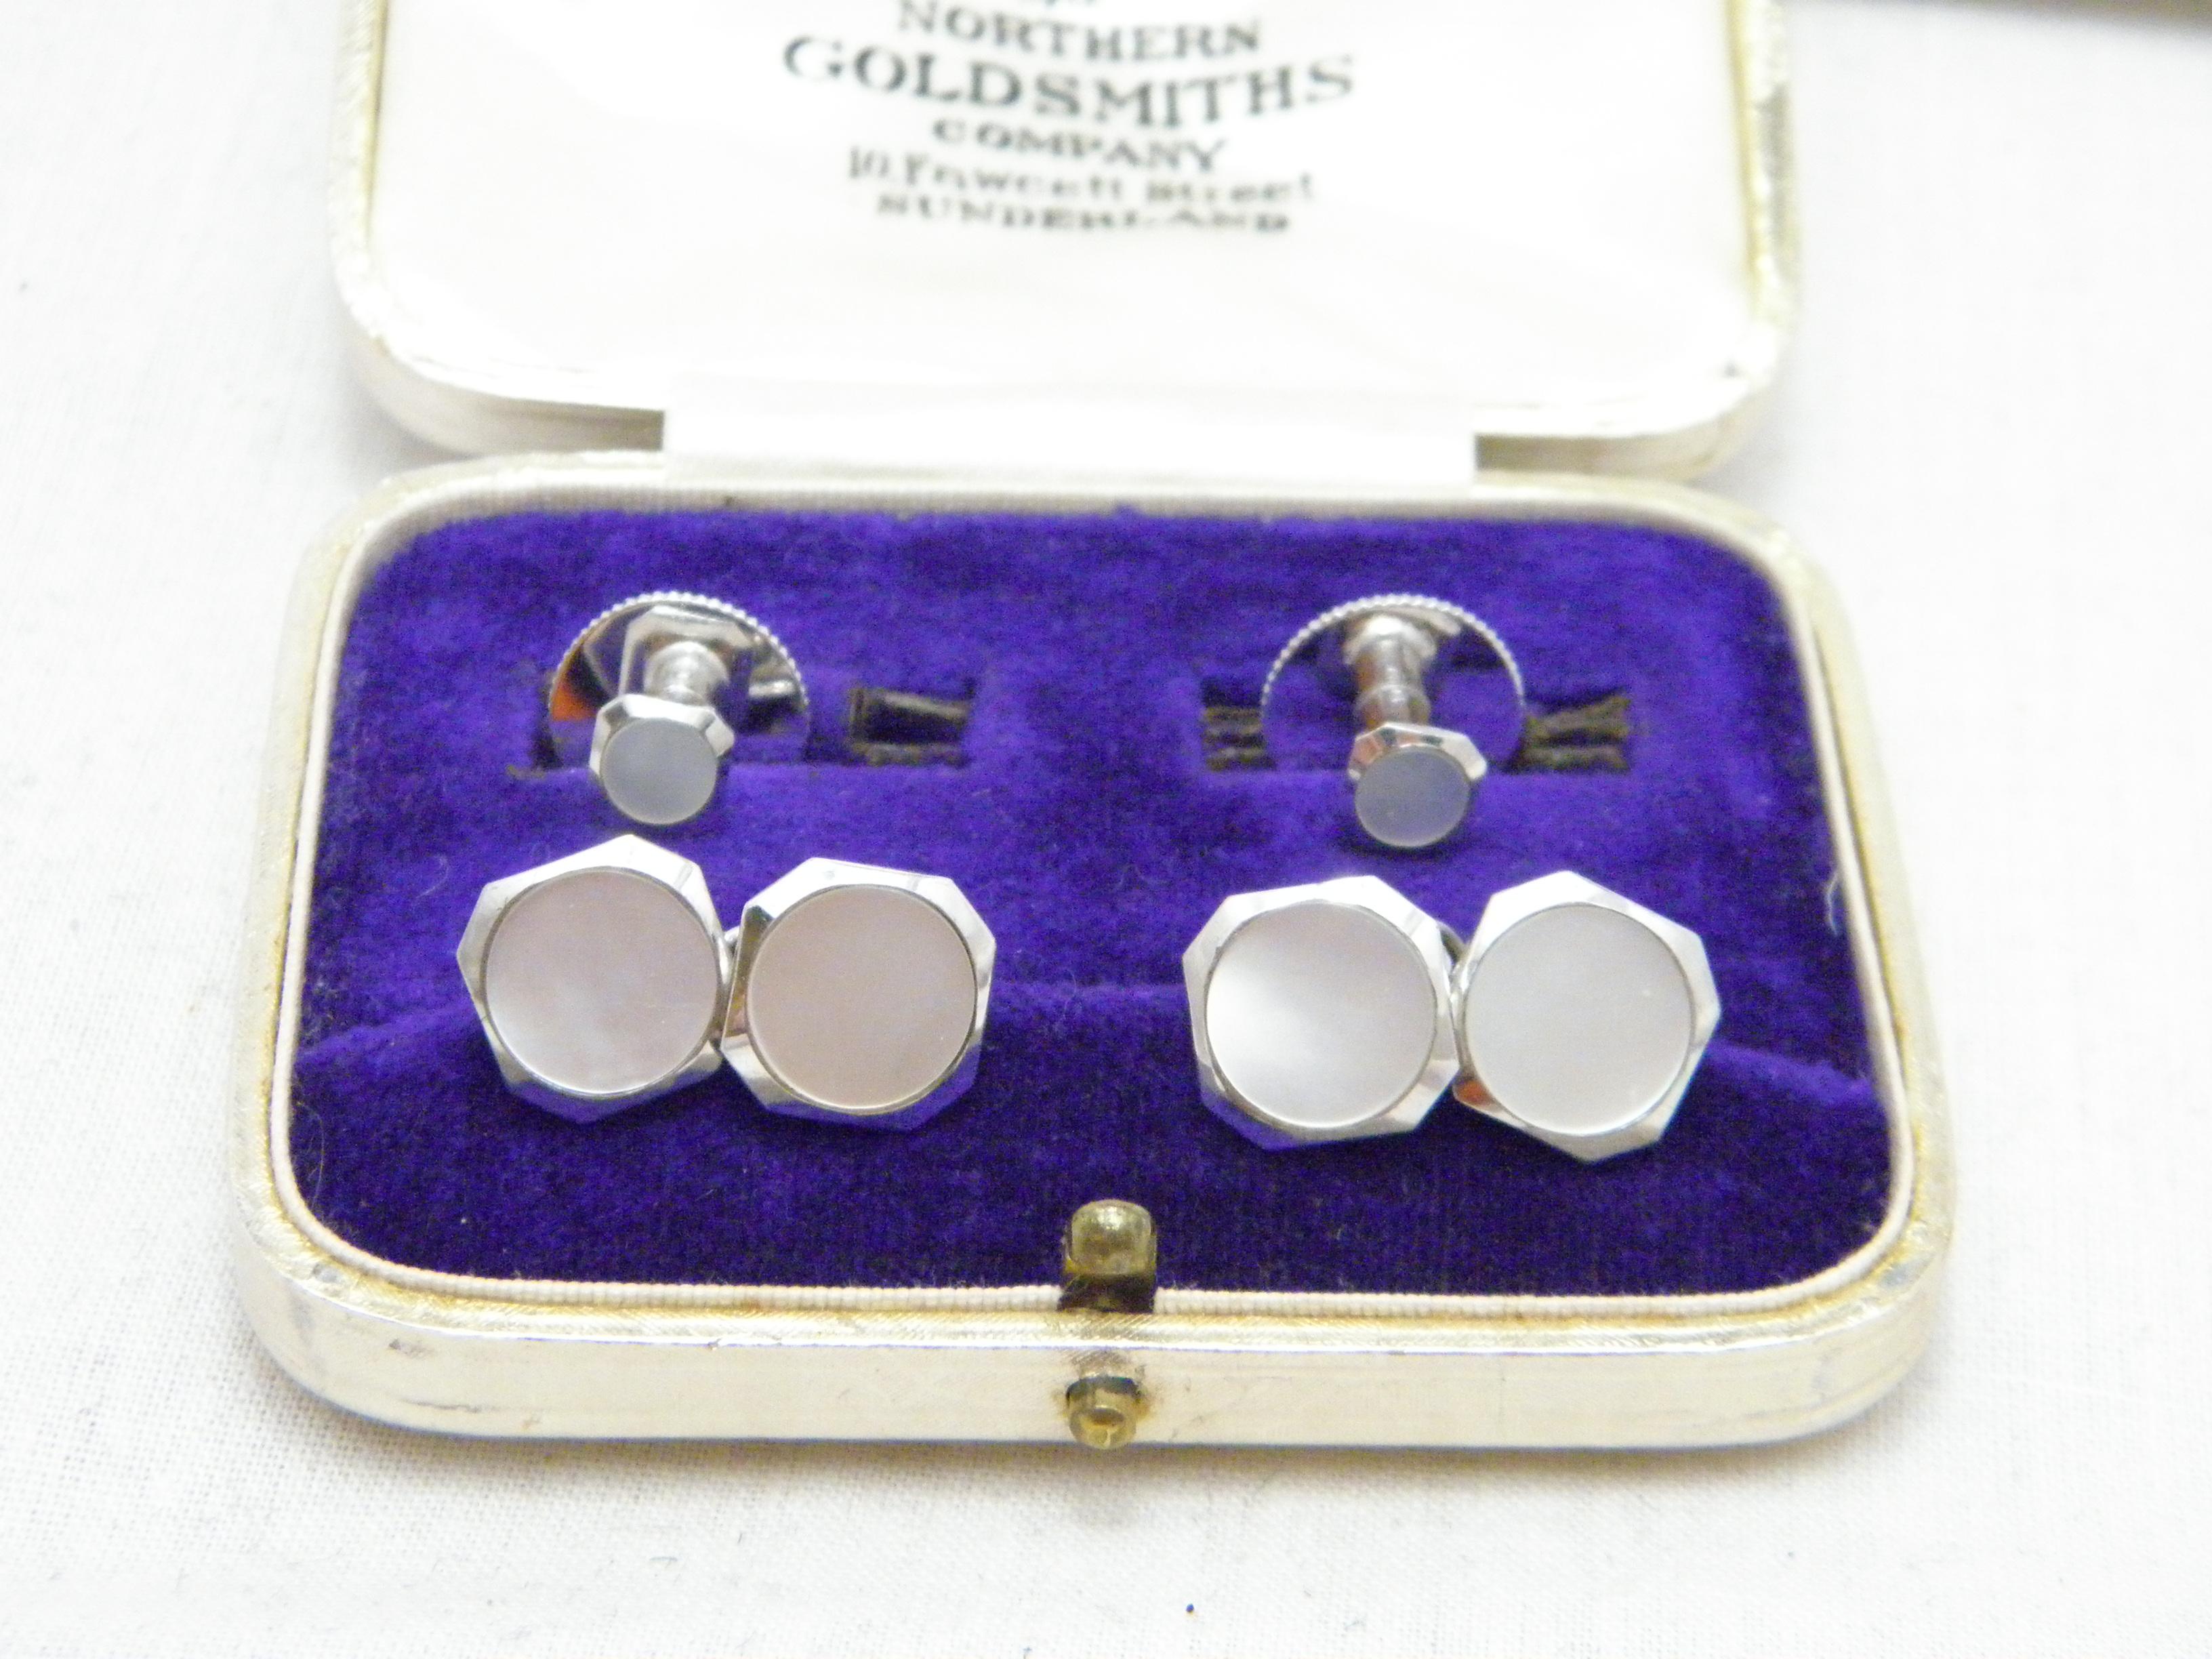 If you have landed on this page then you have an eye for beauty.

On offer is this gorgeous

9CT VINTAGE WHITE GOLD SET OF CUFFLINKS AND SHIRT STUDS

DETAILS
Material: 9ct (375/000) Solid White Gold
Style: Art Deco Style twin panelled chain link